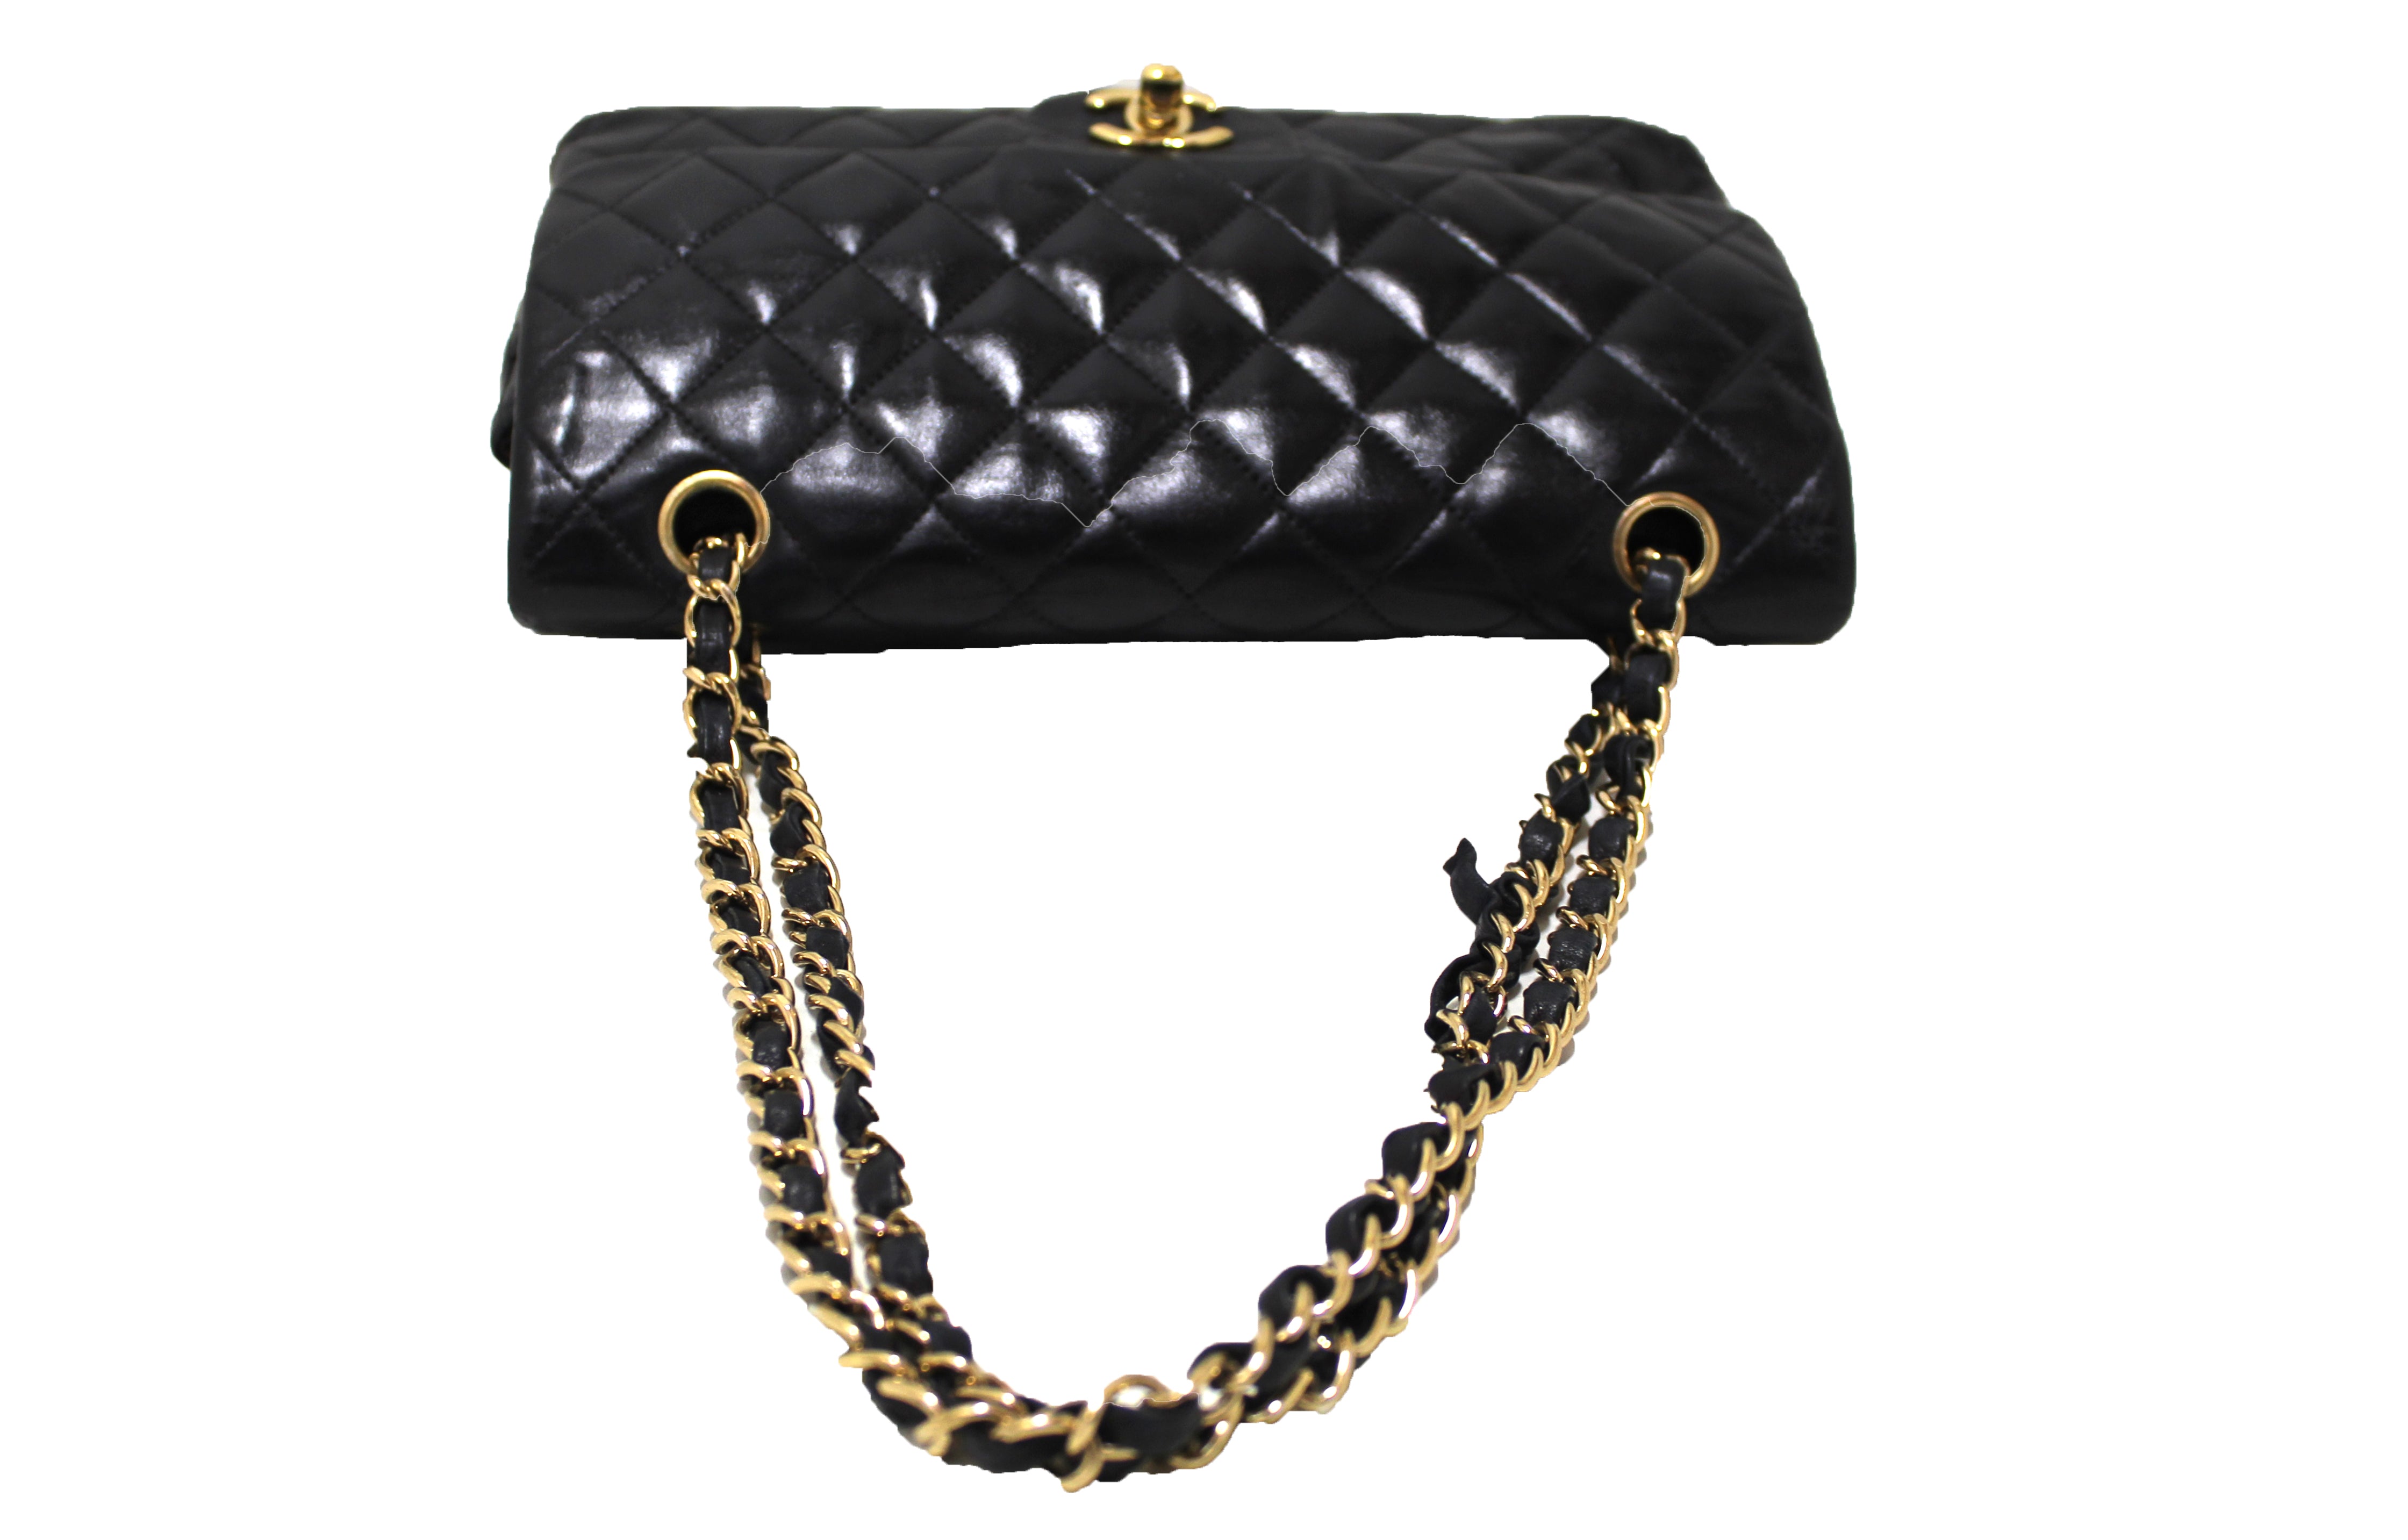 Authentic CHANEL Double Flap Black Quilted Leather Gold Chain